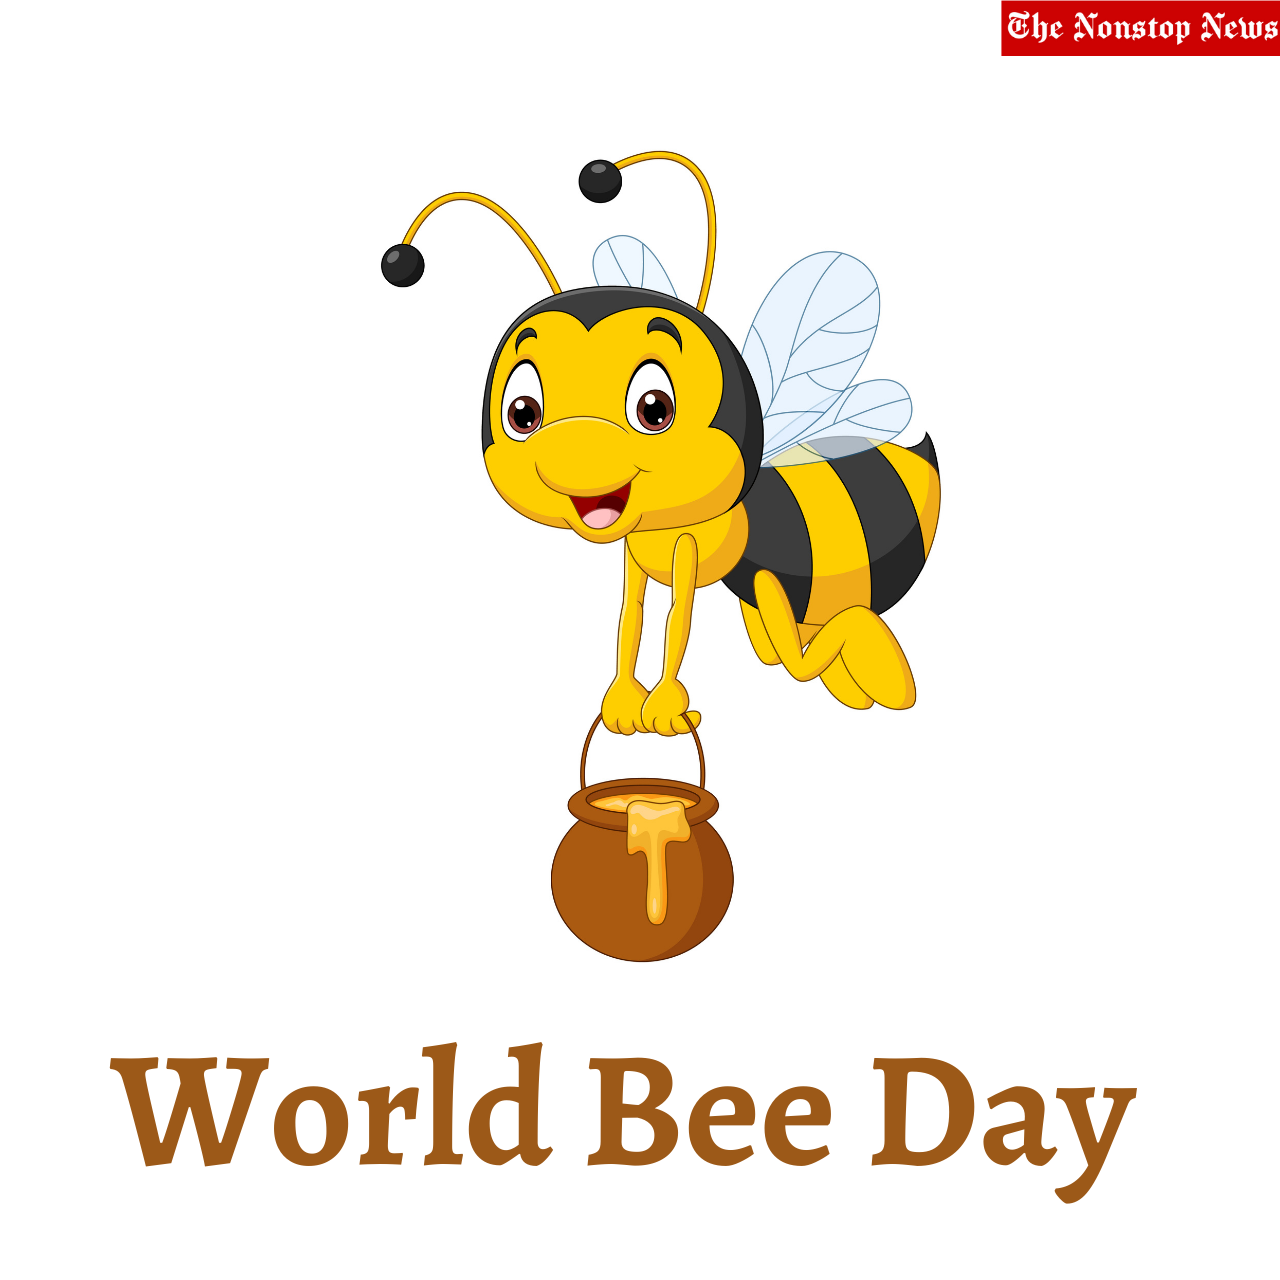 World Bee Day 2022: Best Posters, Images, Quotes, Messages To Share